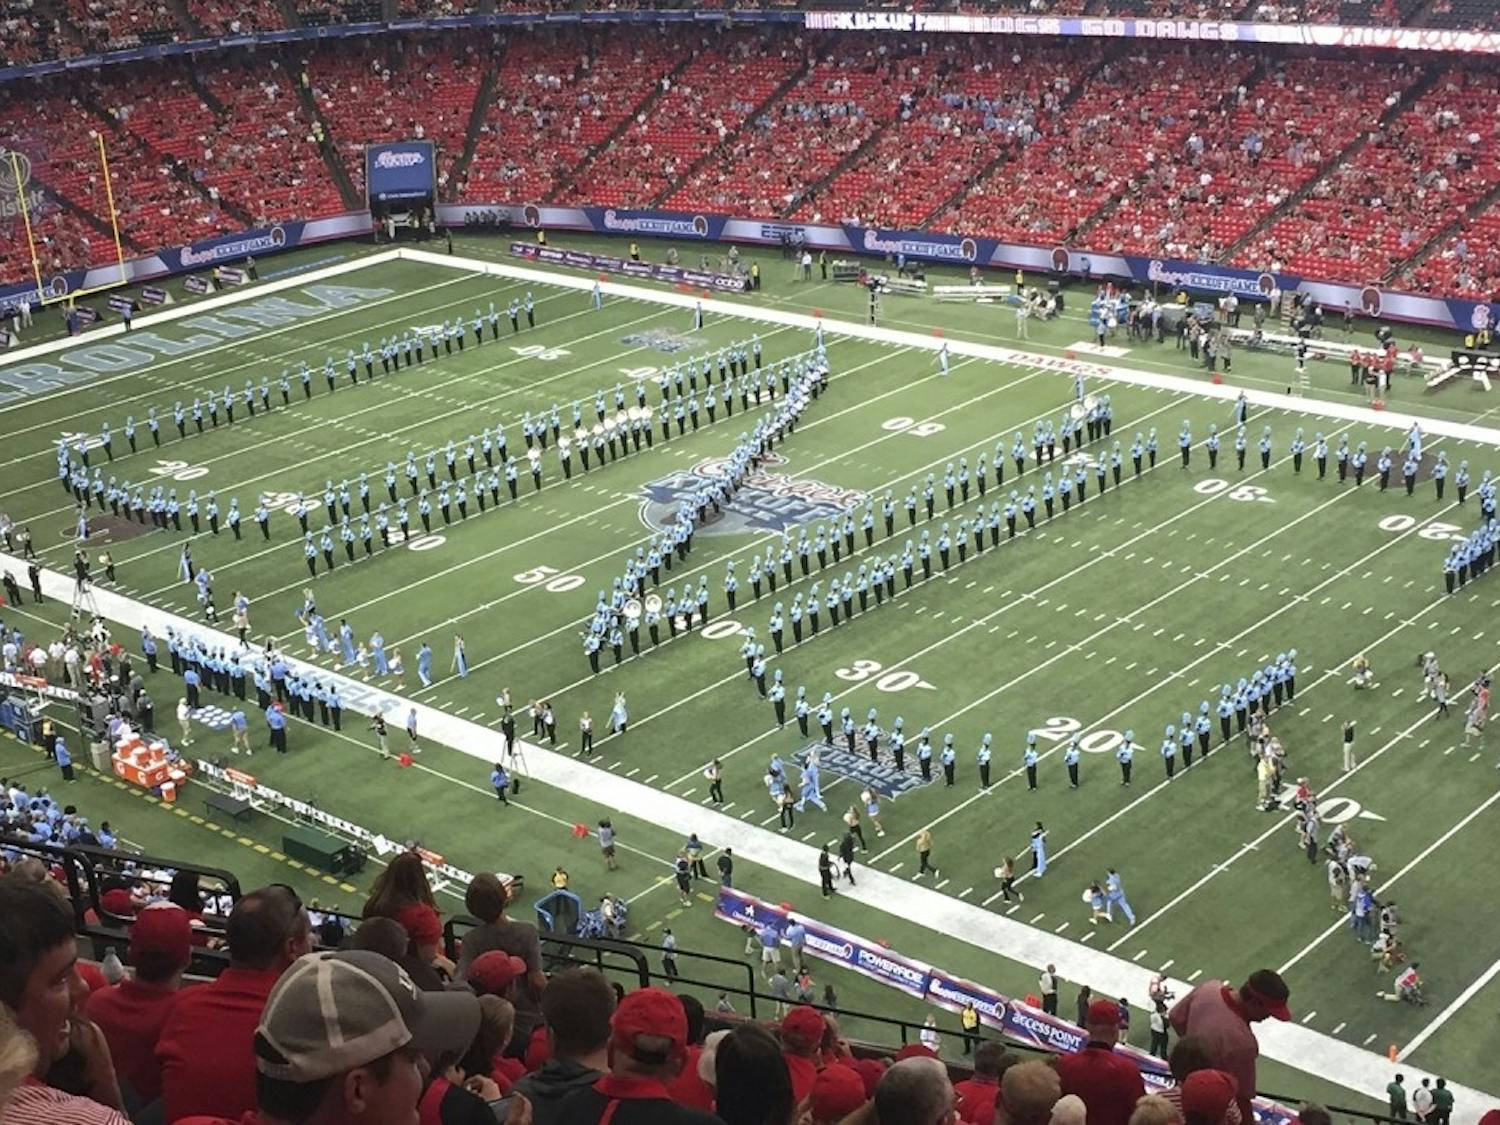 The UNC marching band, The Marching Tar Heels, performs at the Chick-fil-A kickoff game against Georgia in Atlanta on Sep. 3. Photo Courtesy of Kristie Thompson.

